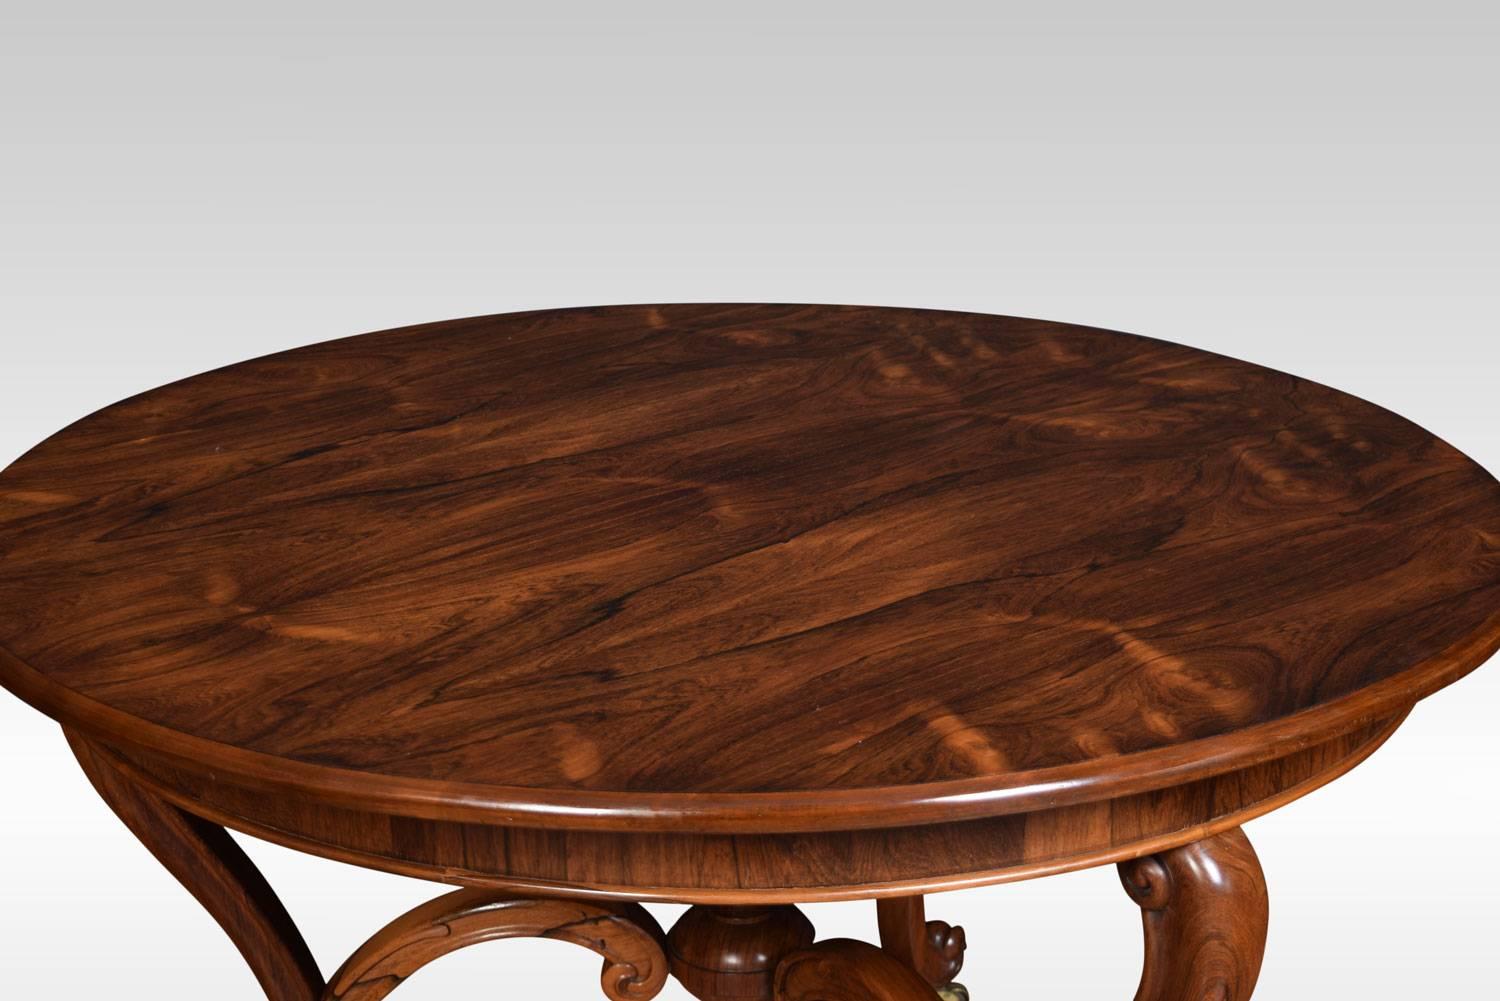 19th century rosewood centre table, the large circular top with moulded edge, raised on three scrolling legs united by carved stretchers. Terminating in original brass castors.
Dimensions:
Height 29.5 inches
Width 50.5 inches
Depth 50.5 inches.